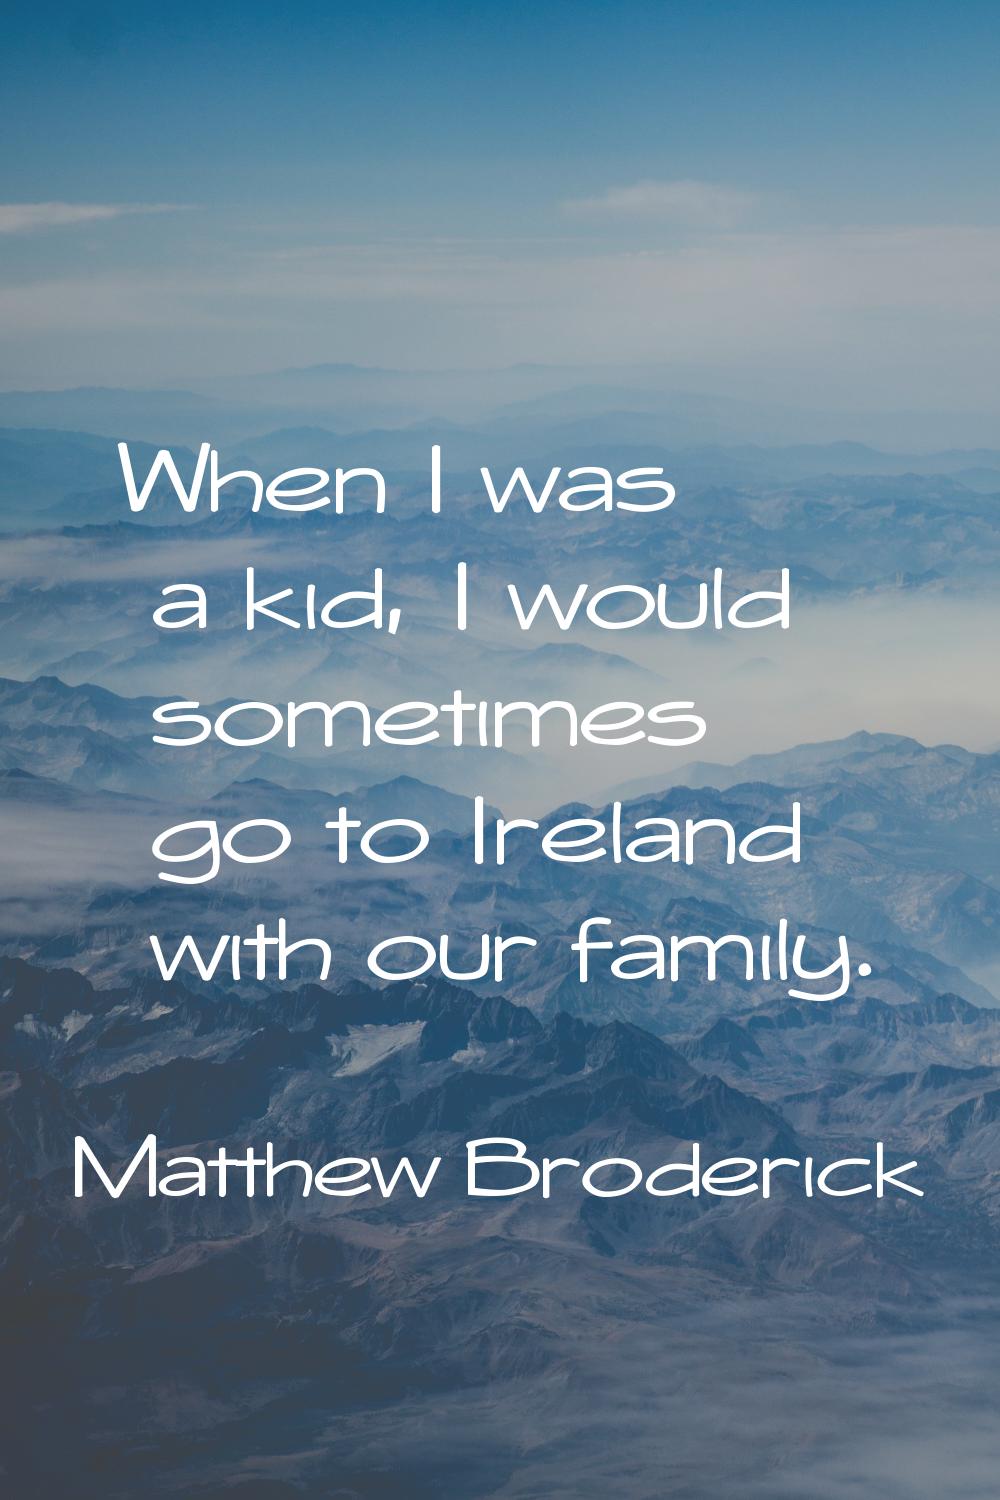 When I was a kid, I would sometimes go to Ireland with our family.